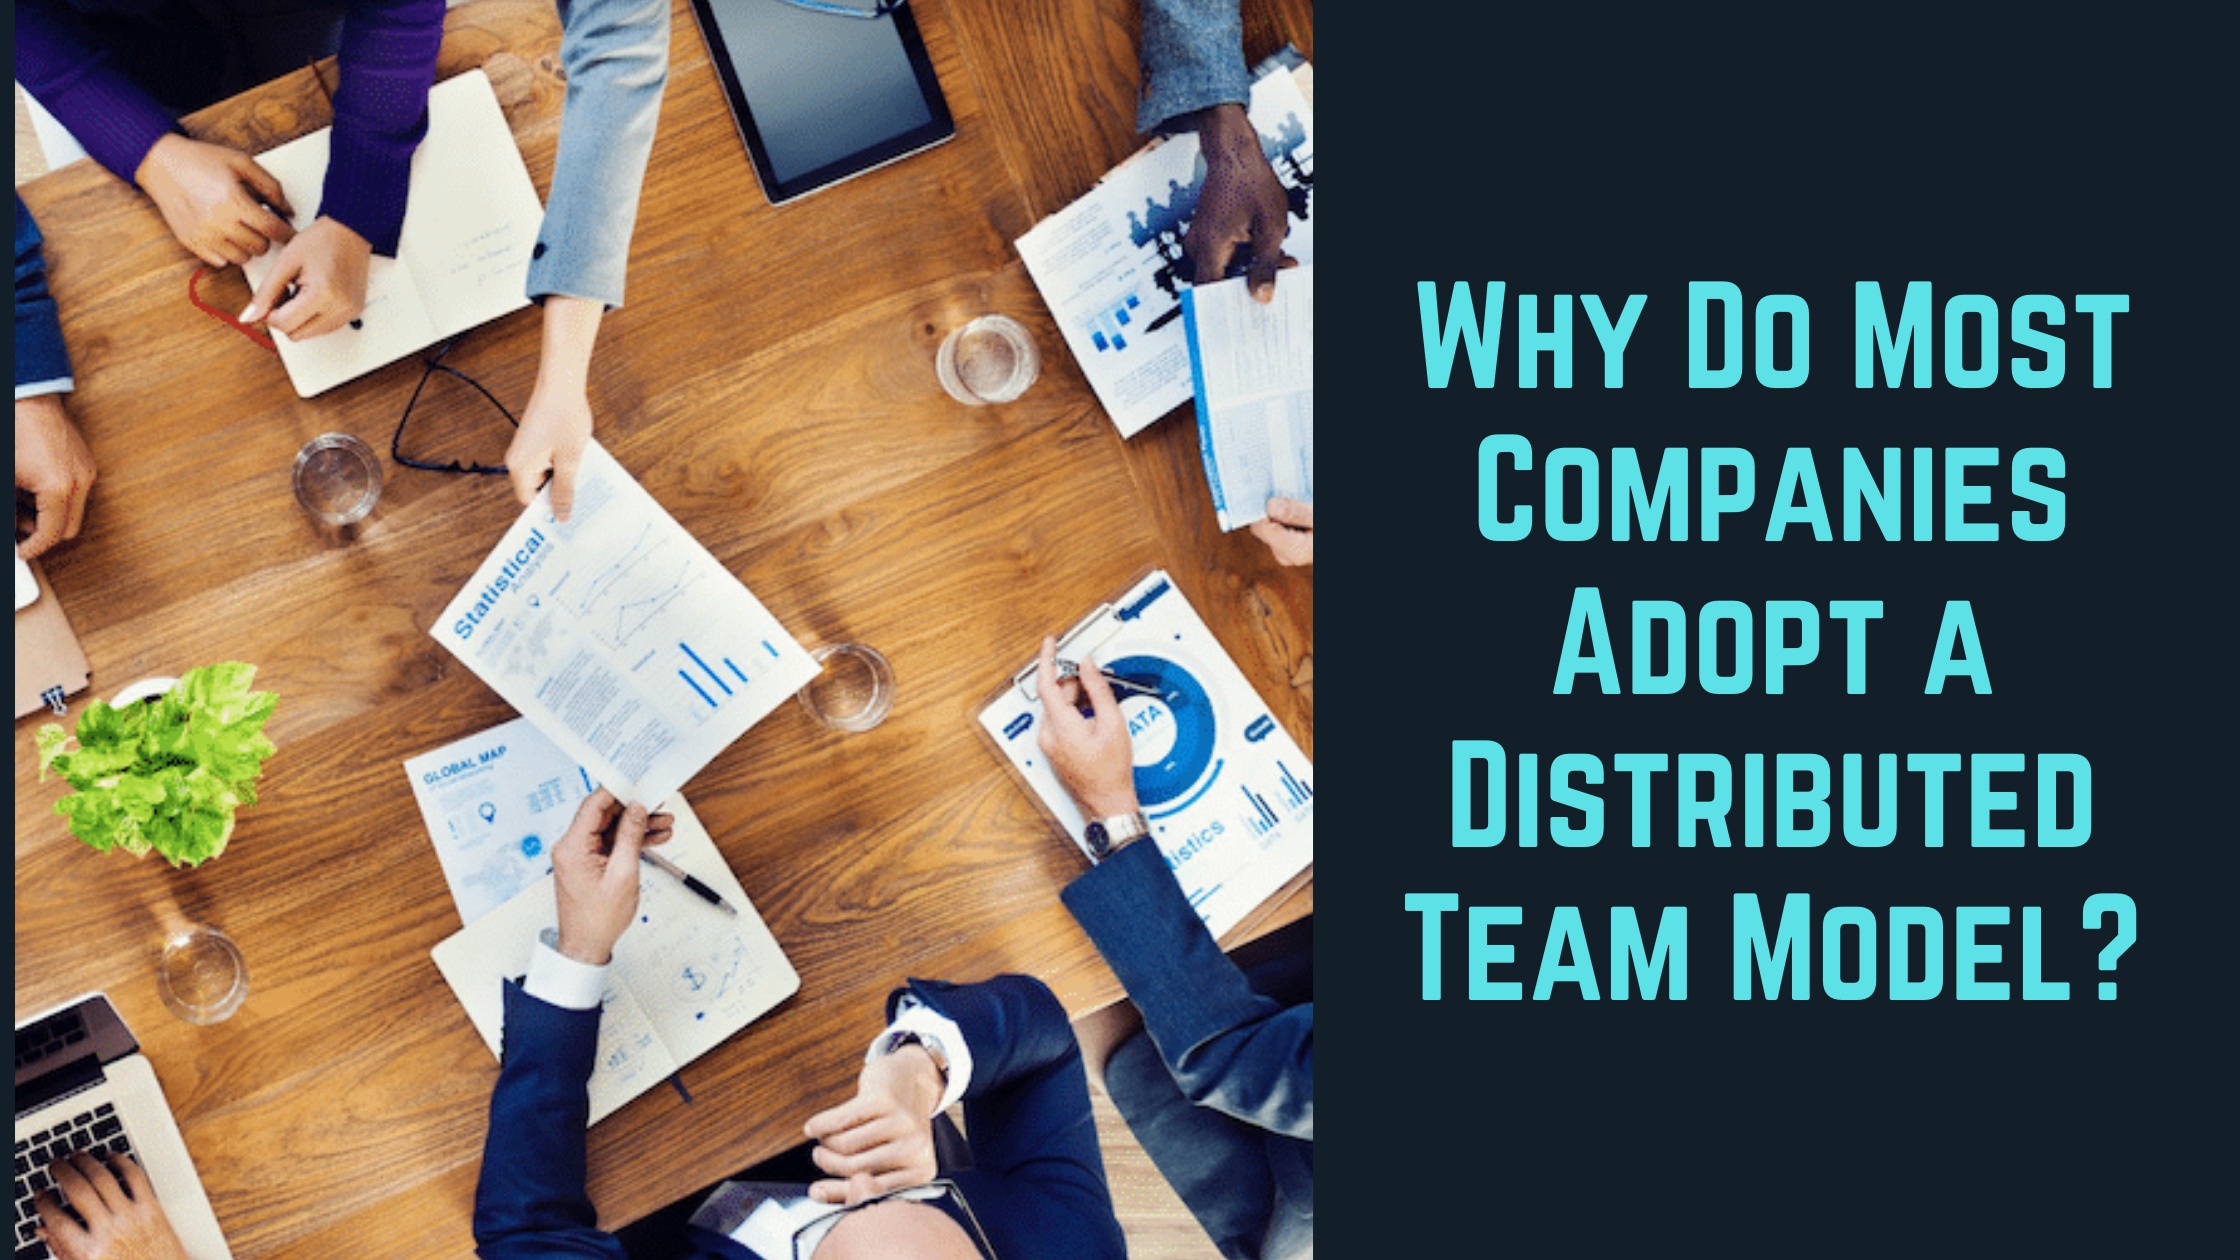 Why Do Most Companies Adopt a Distributed Team Model?